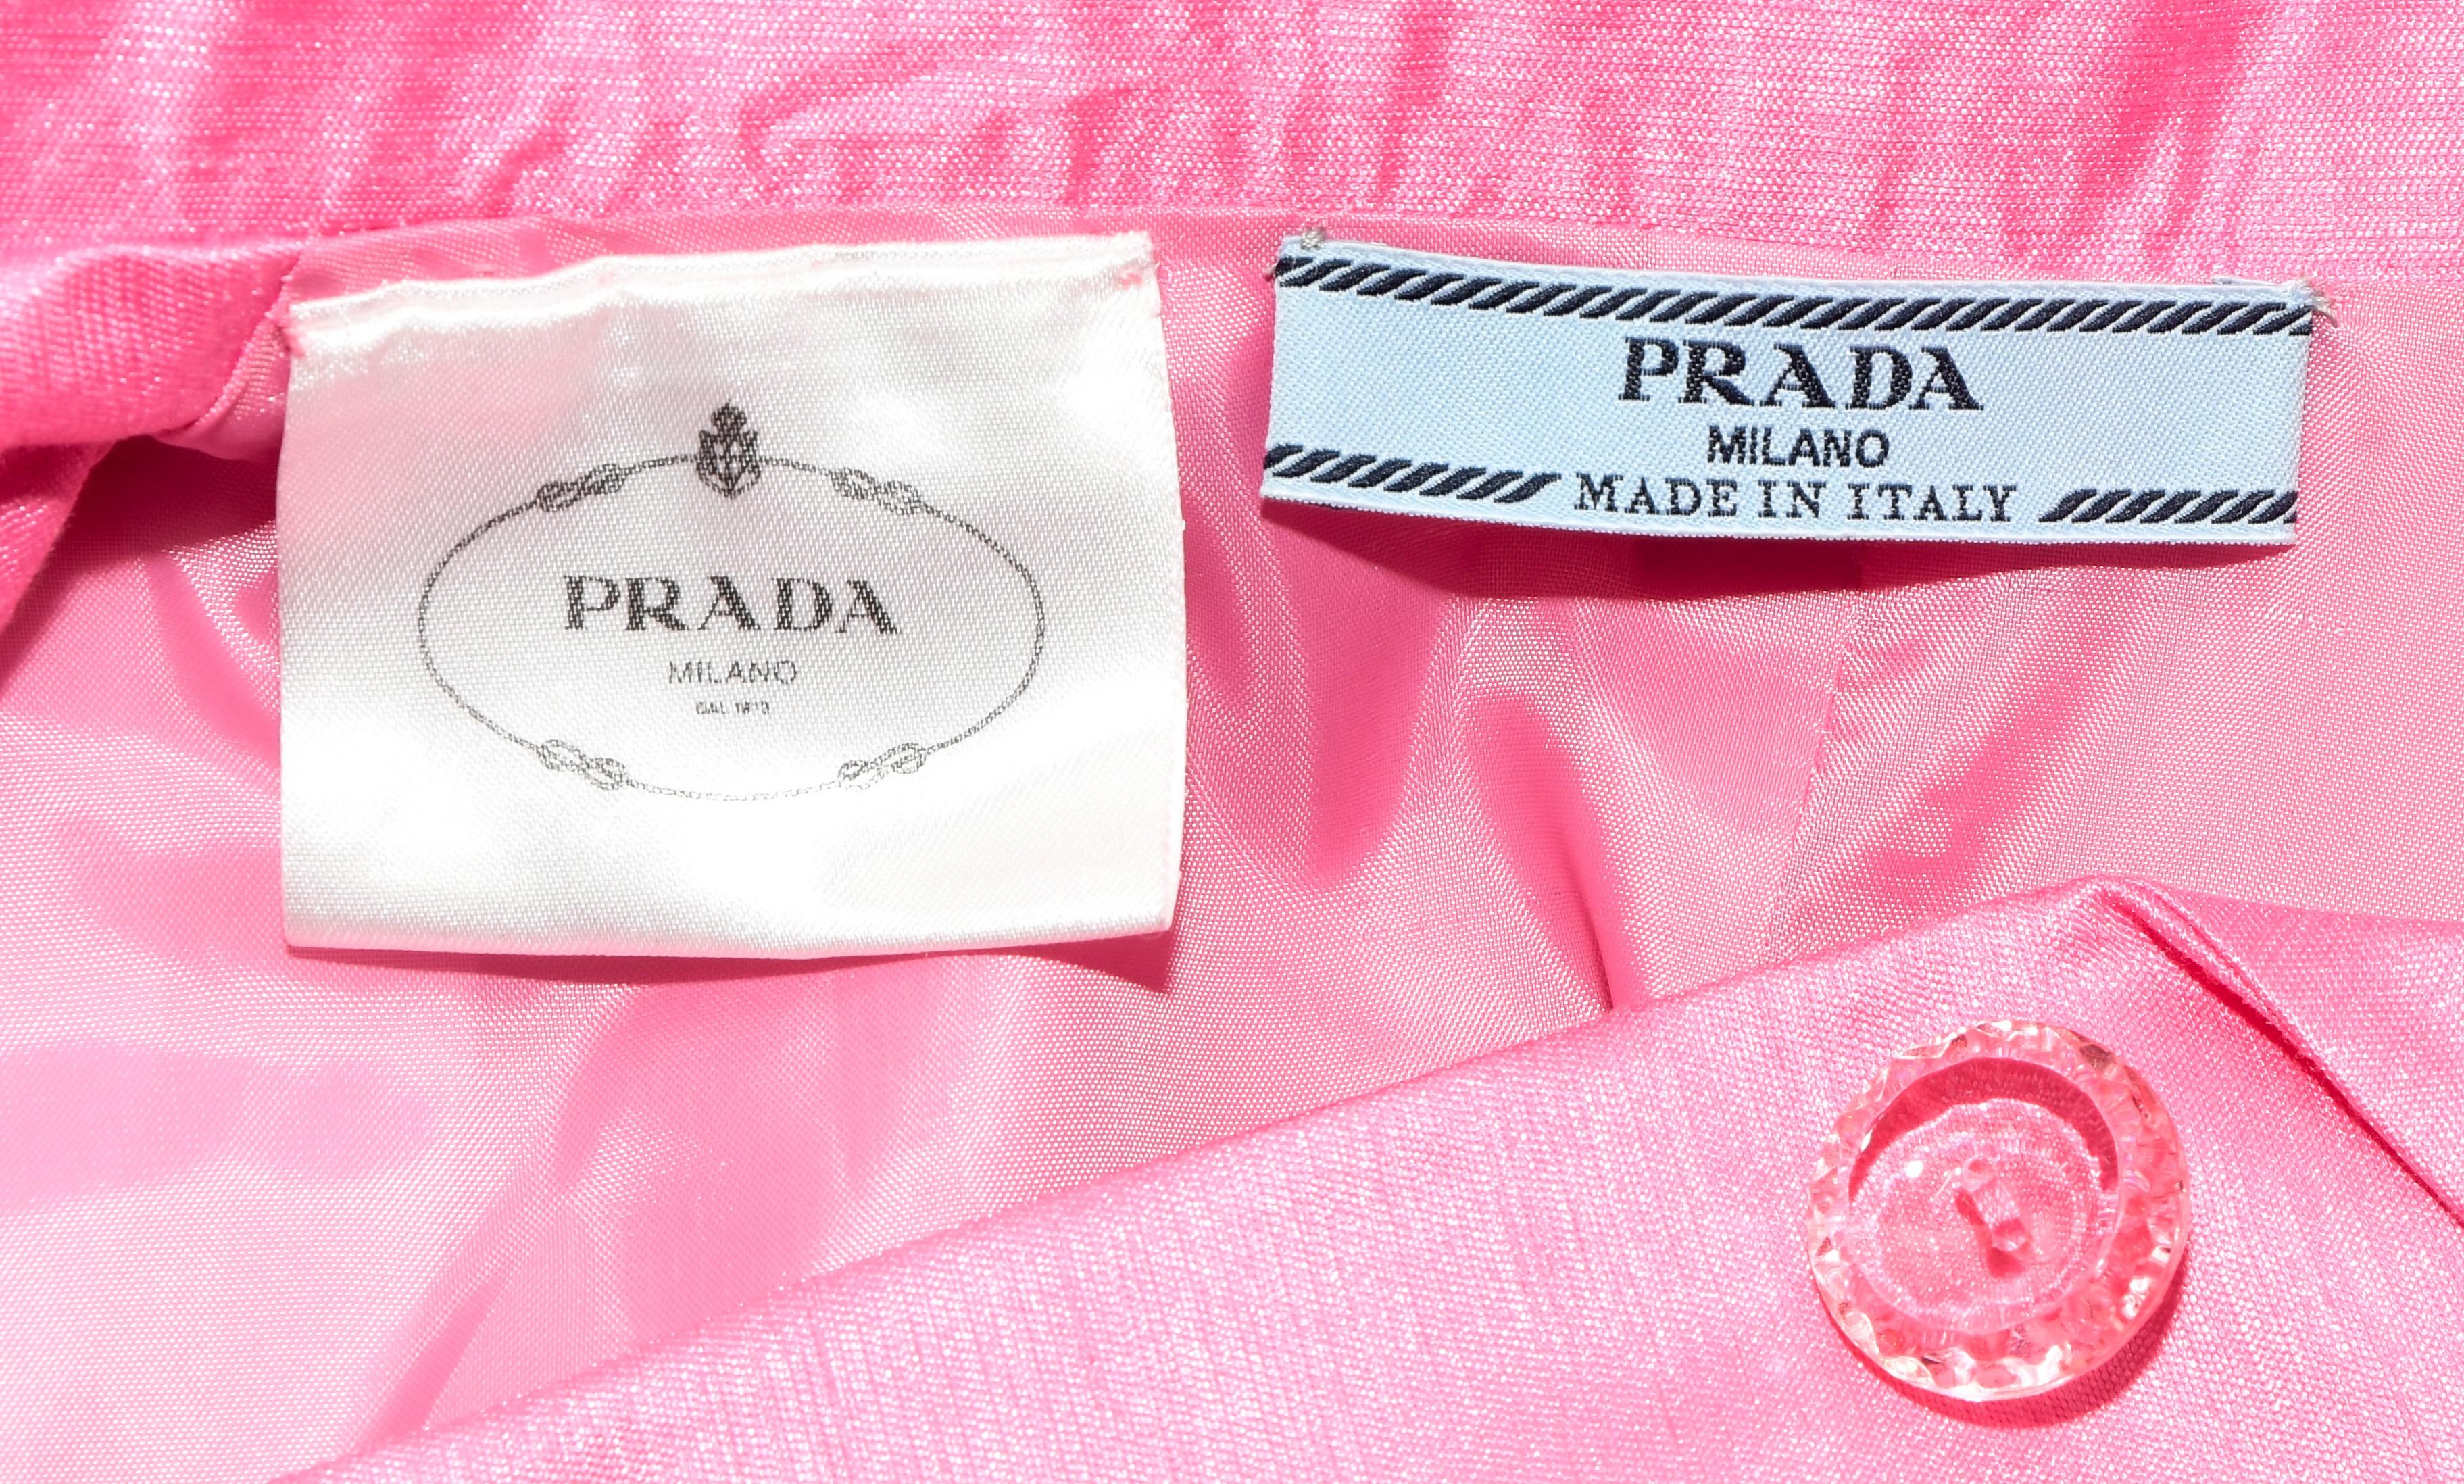 Prada Primavera Pink Blossom Skirt Suit In Excellent Condition For Sale In Palm Beach, FL